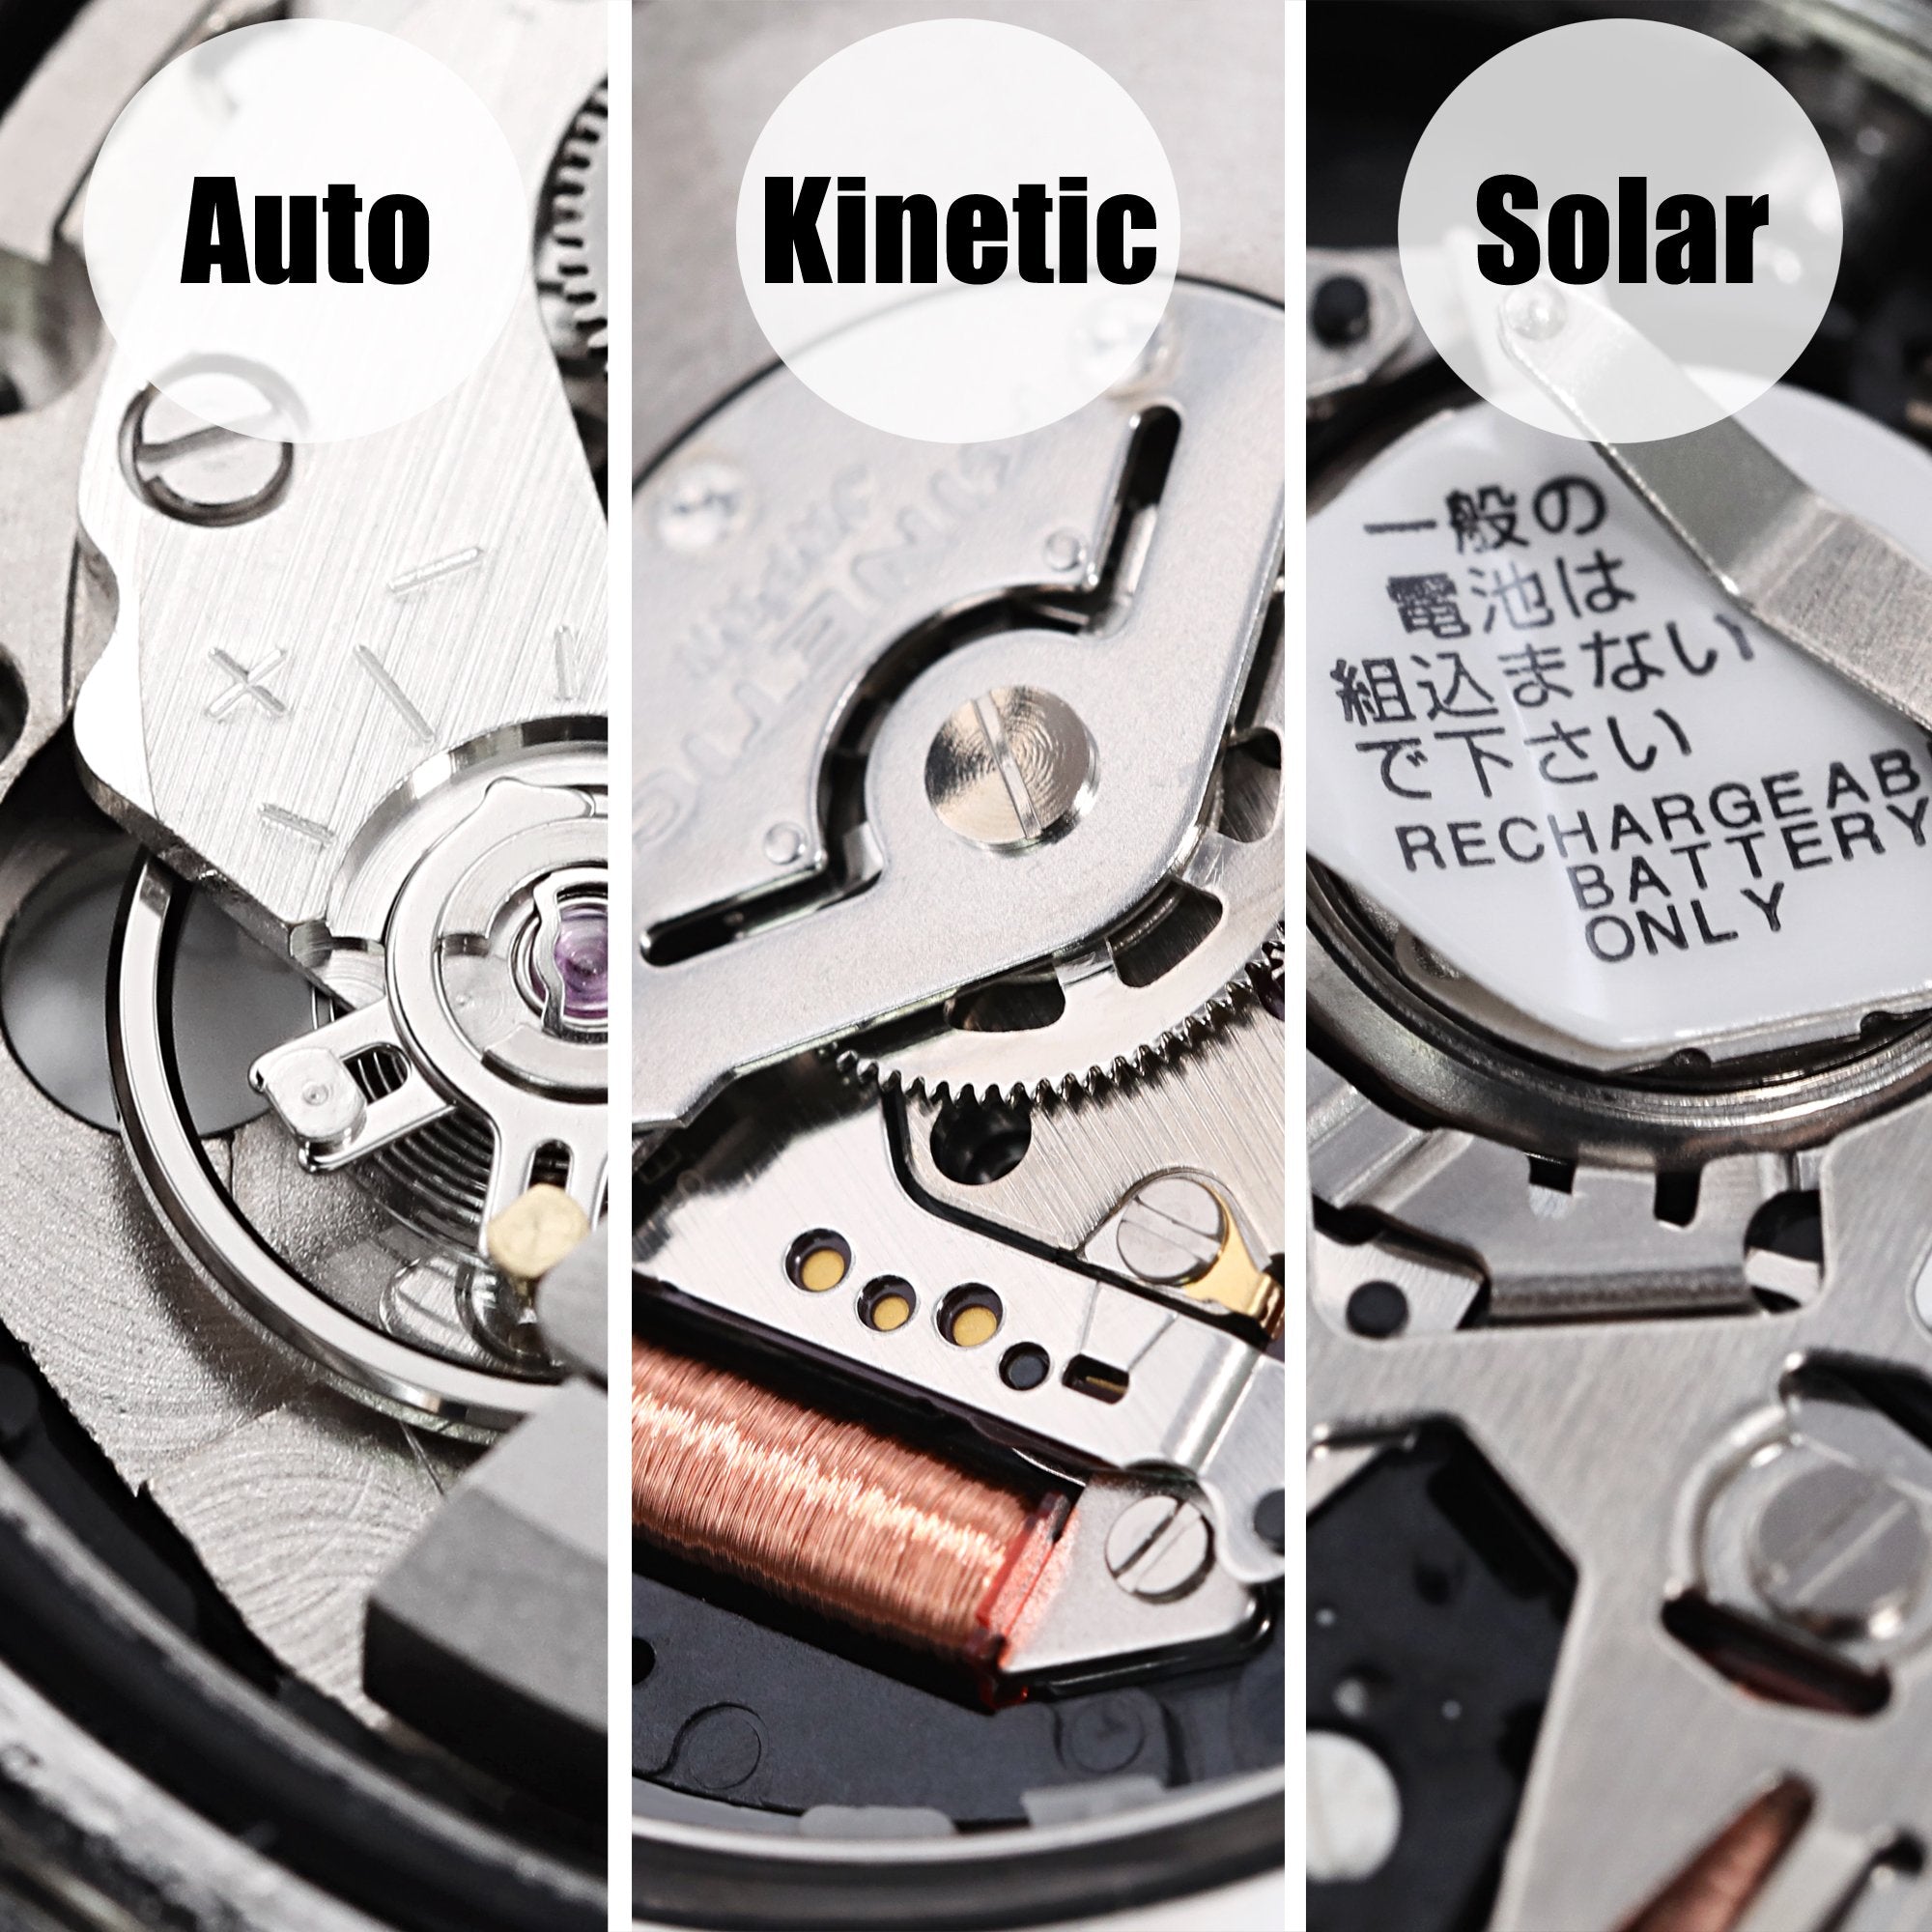 Seiko Kinetic Watch Repair Capacitor Crystal Replacement Service 2 Year  Warranty | eBay